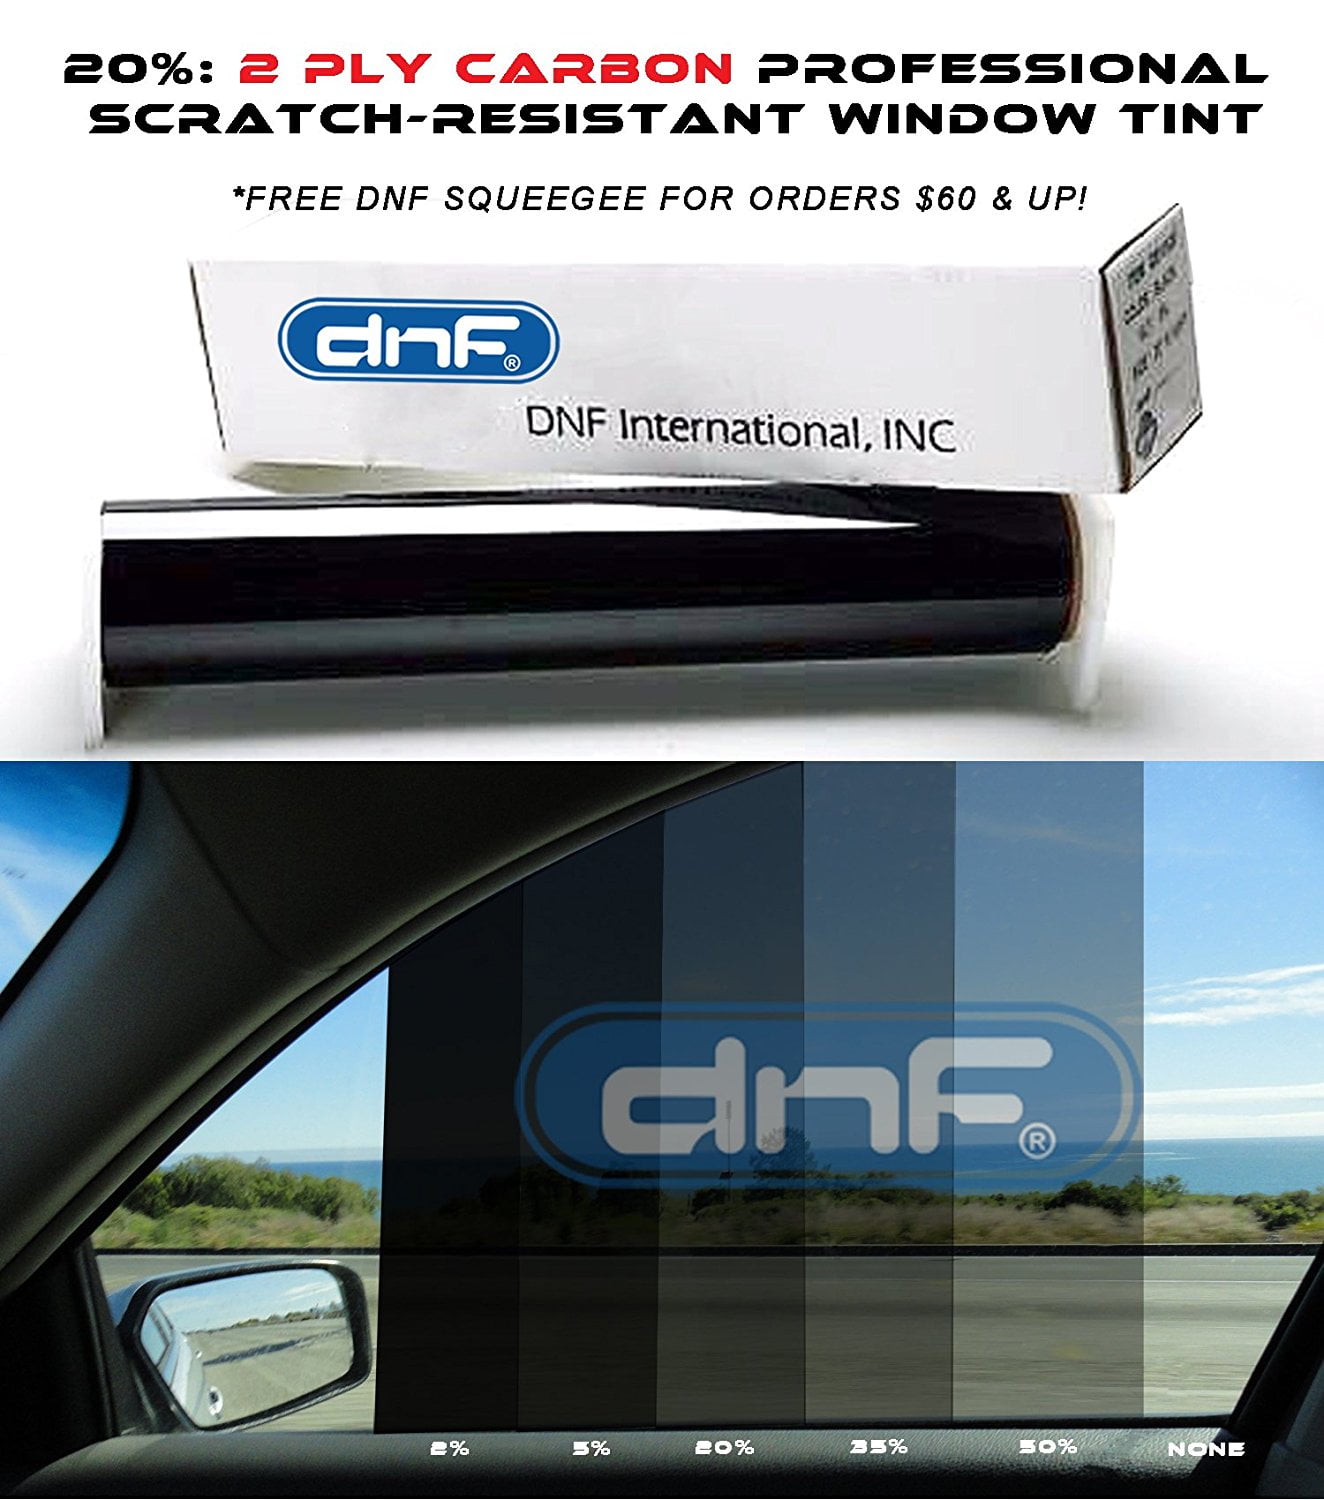 Gila Window Tint Remover -, 1 each, sold by each